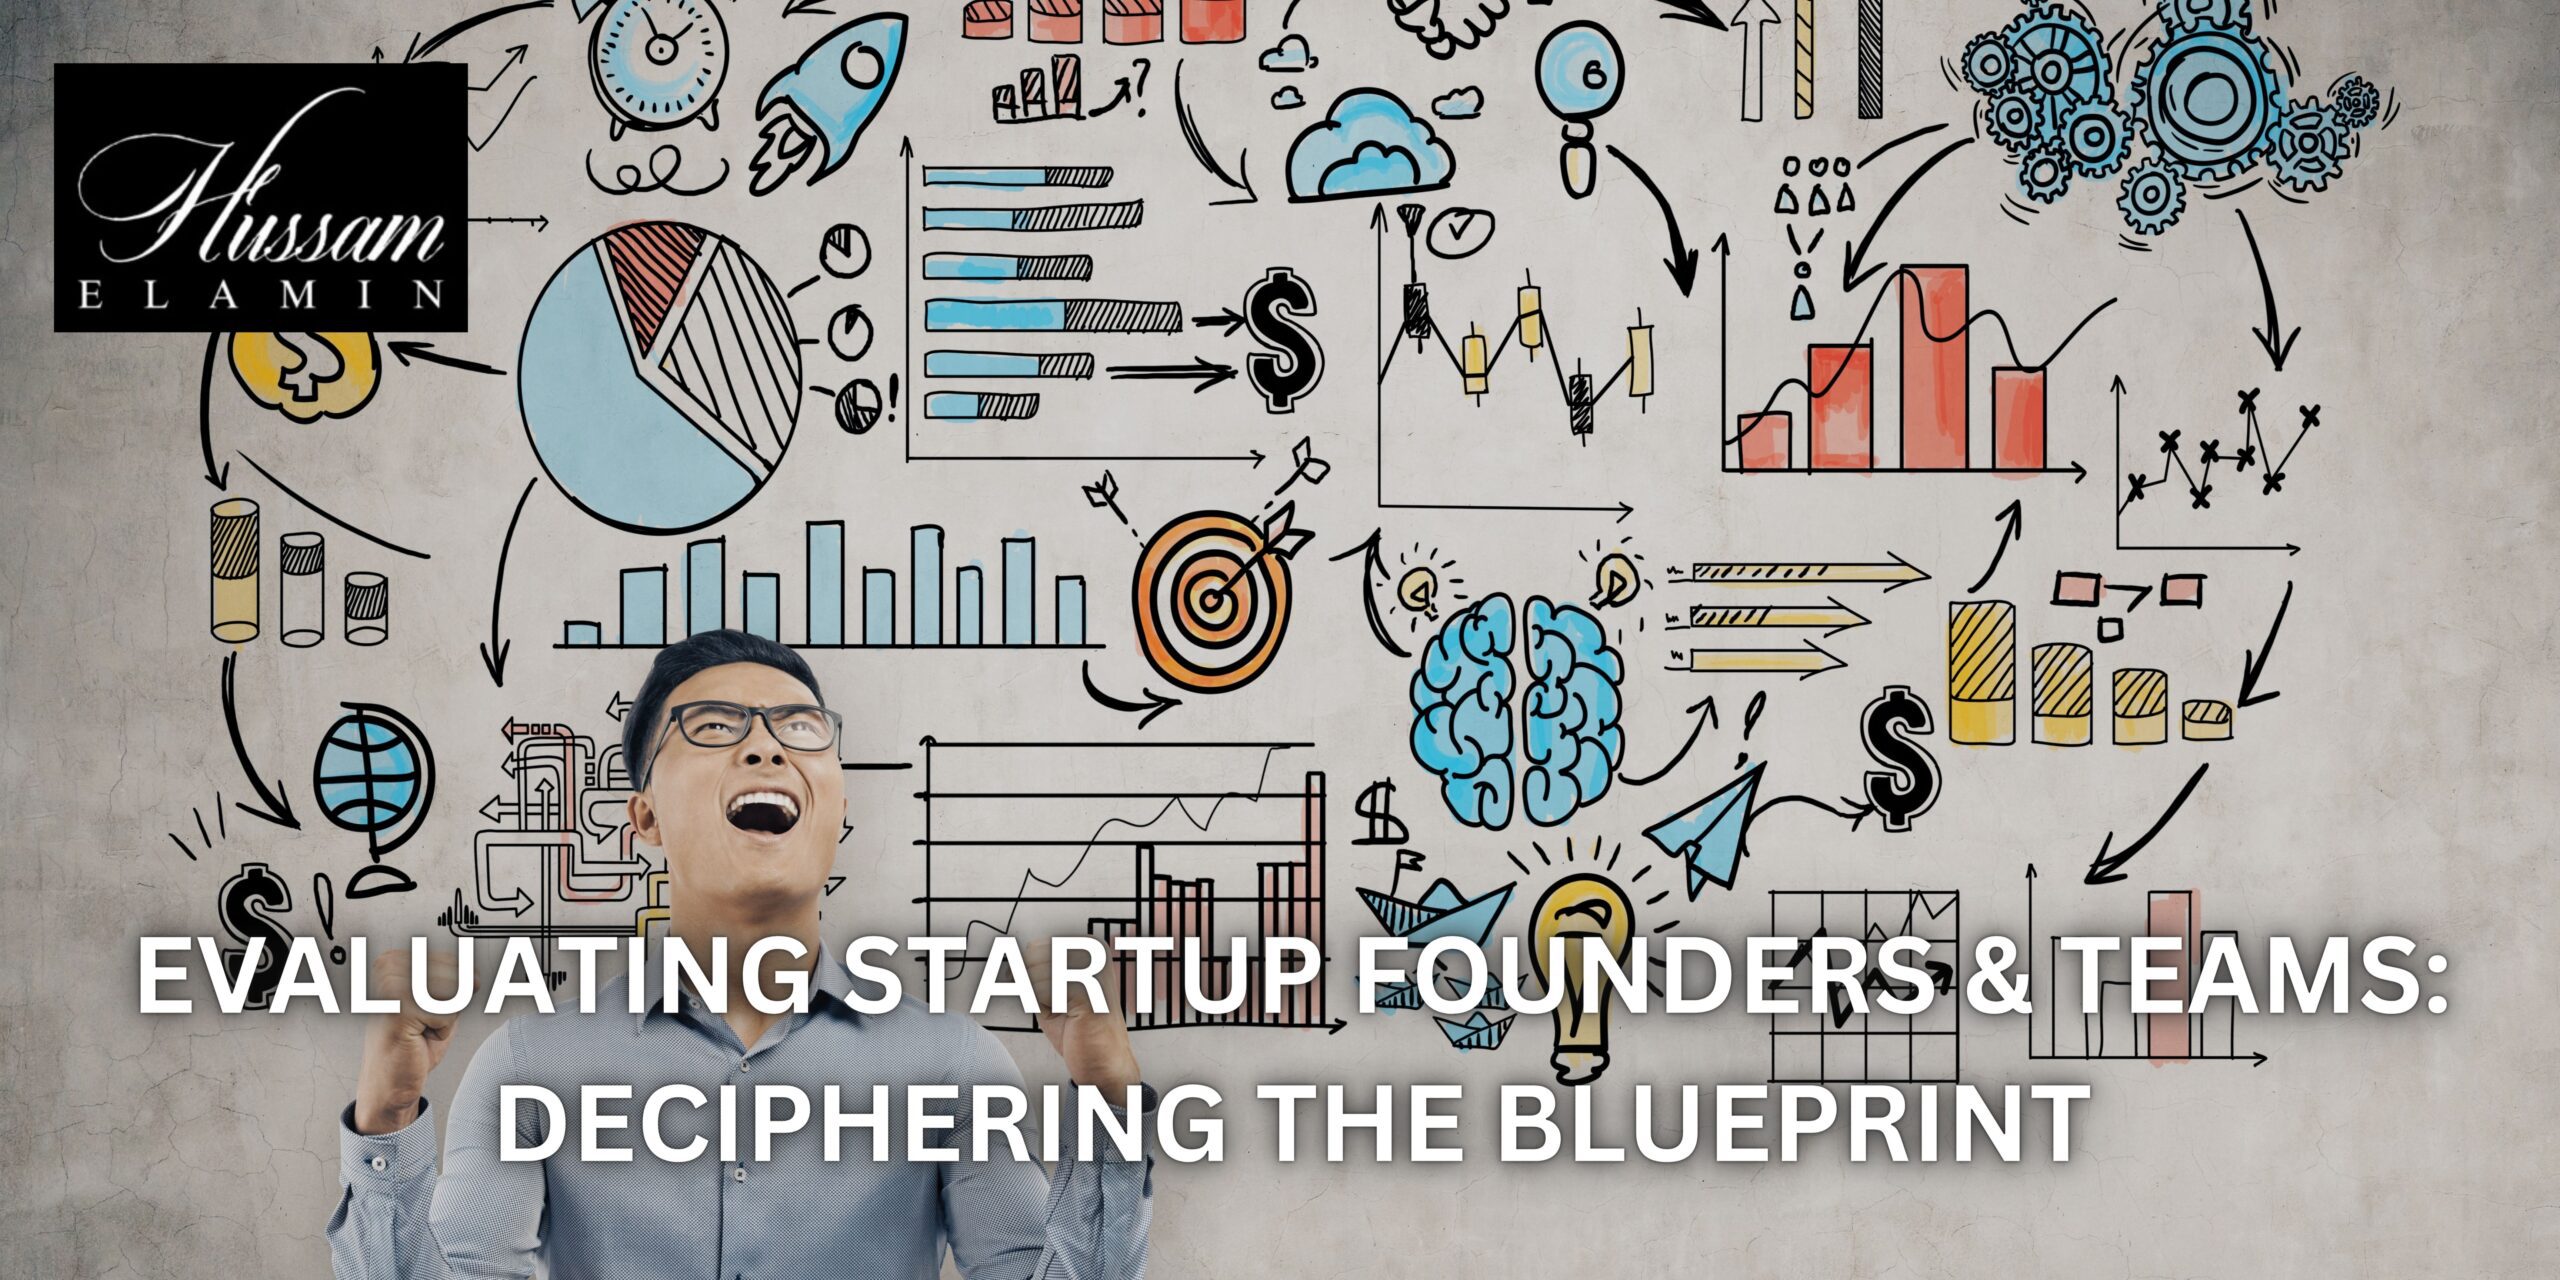 EVALUATING STARTUP FOUNDERS & TEAMS DECIPHERING THE BLUEPRINT